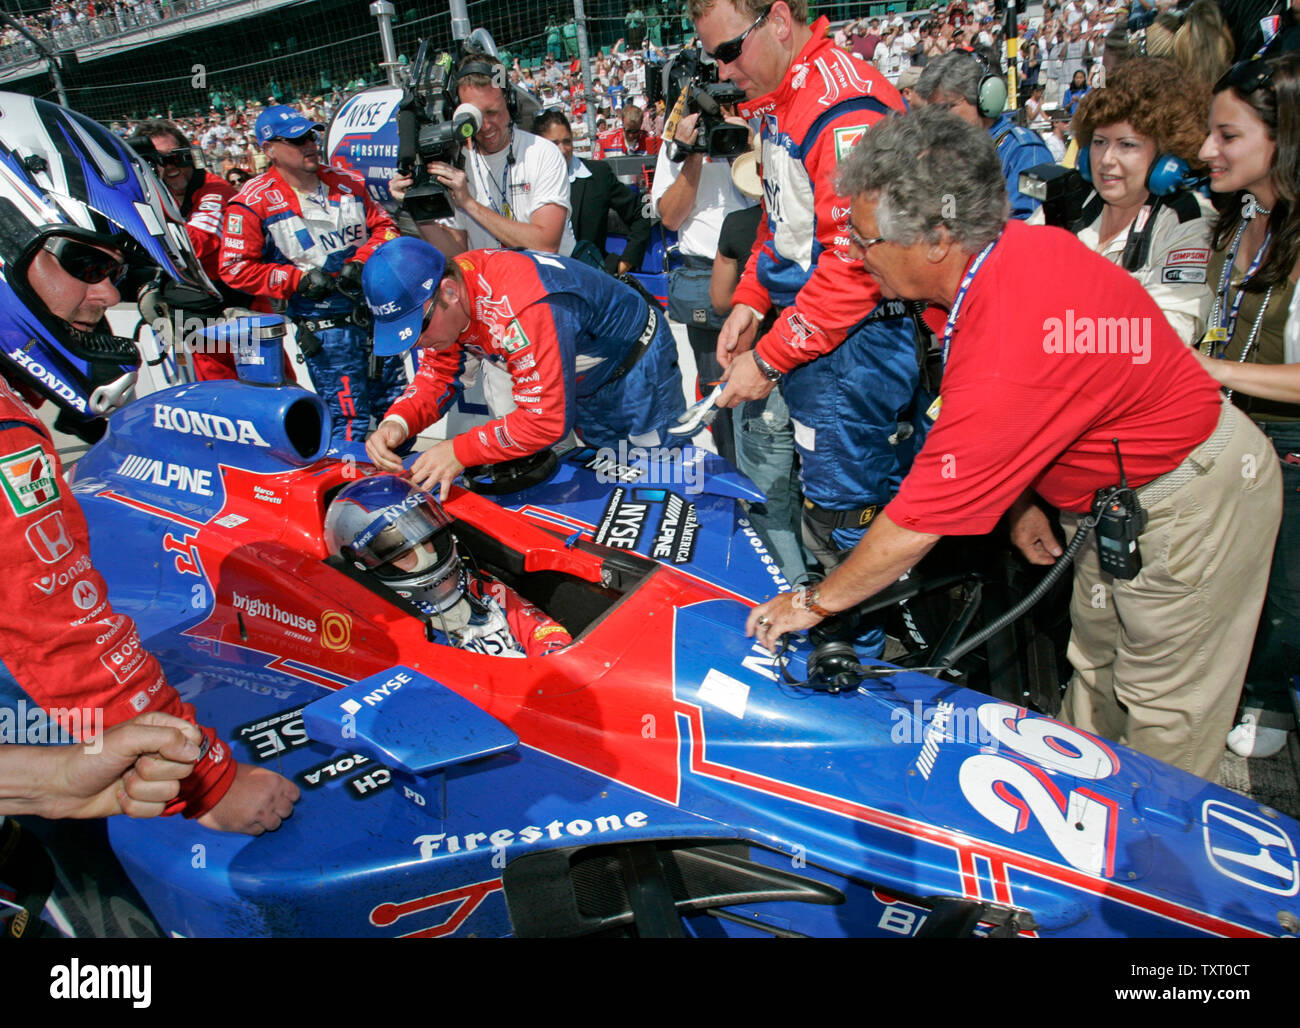 Mario Andretti, right, greets his grandson Marco after he finishes the 90th running of the Indianapolis 500 on May 28, 2006 in Indianapolis, IN. Andretti finished second in the race, beaten by Sam Hornish Jr. in the second closest Indy 500 finish. (UPI Photo/Brian Kersey) Stock Photo